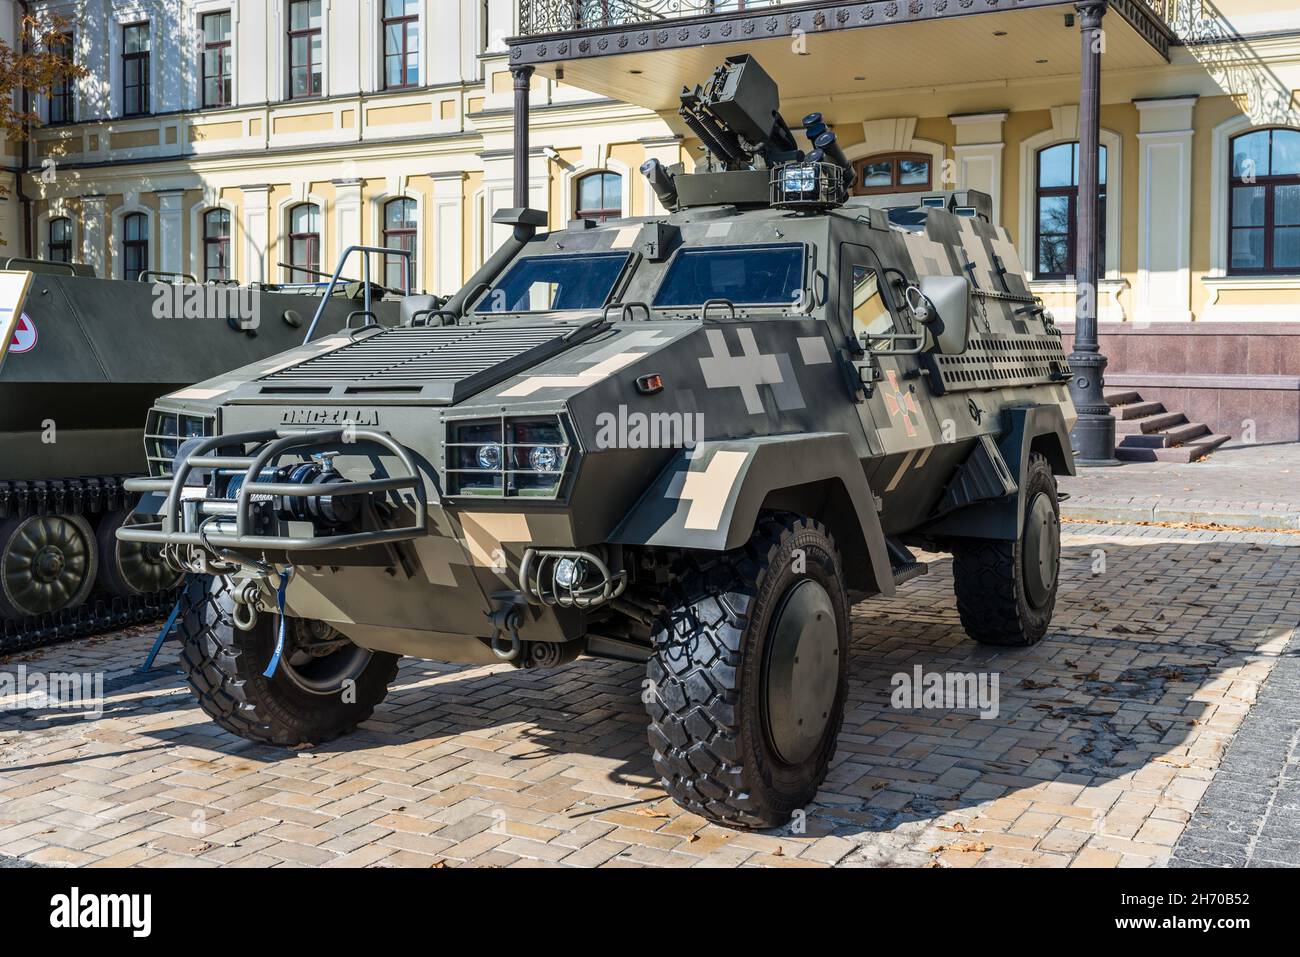 Kyiv, Ukraine - October 15, 2021: The exhibition of military equipment 'The digital future of the army' is being held on Mykhailivska Square in Kyiv. Stock Photo